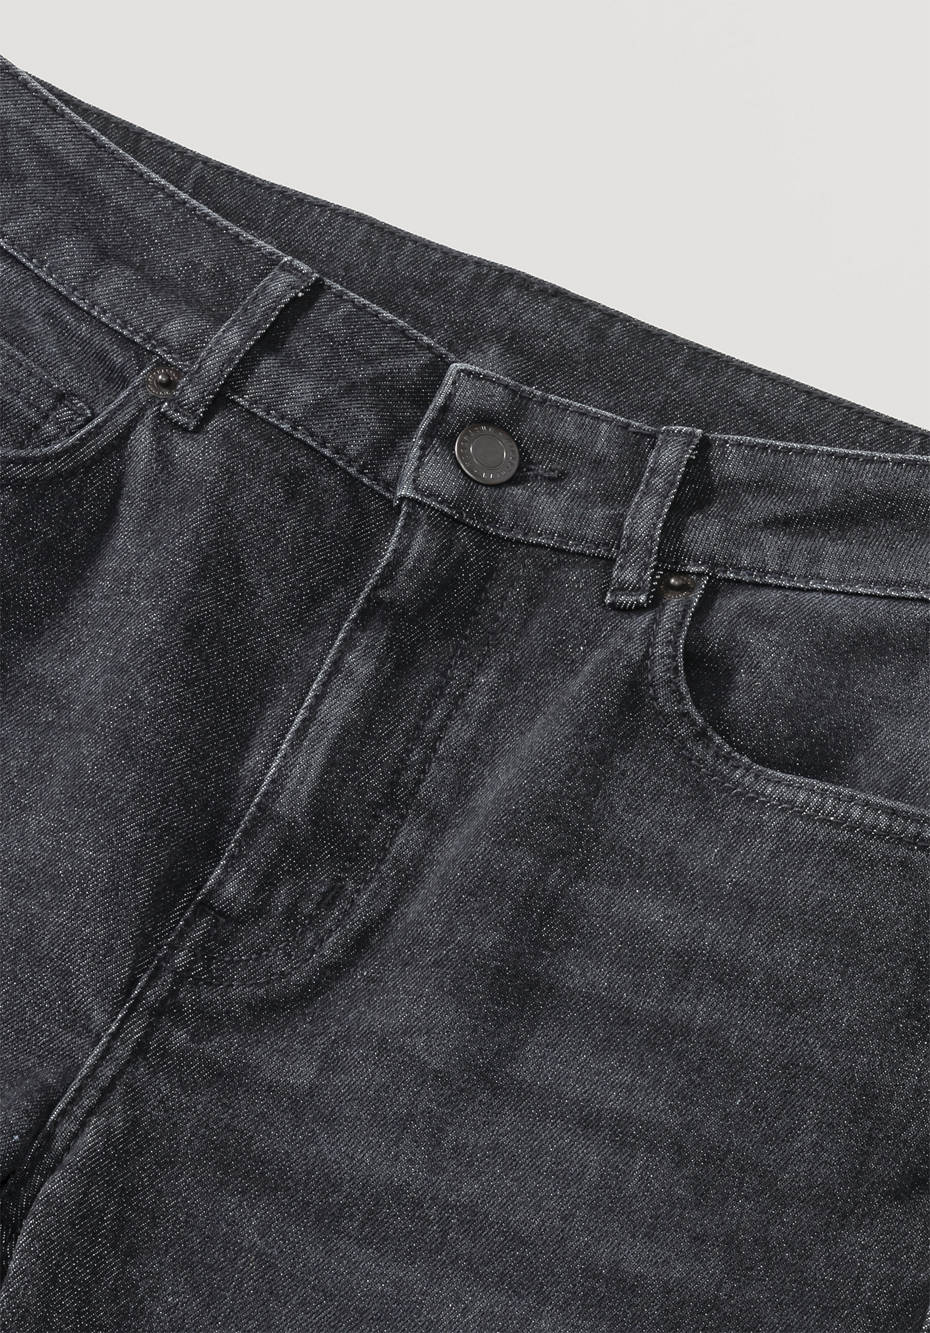 BetterRecycling High Rise Slim Fit Jeans made from organic denim